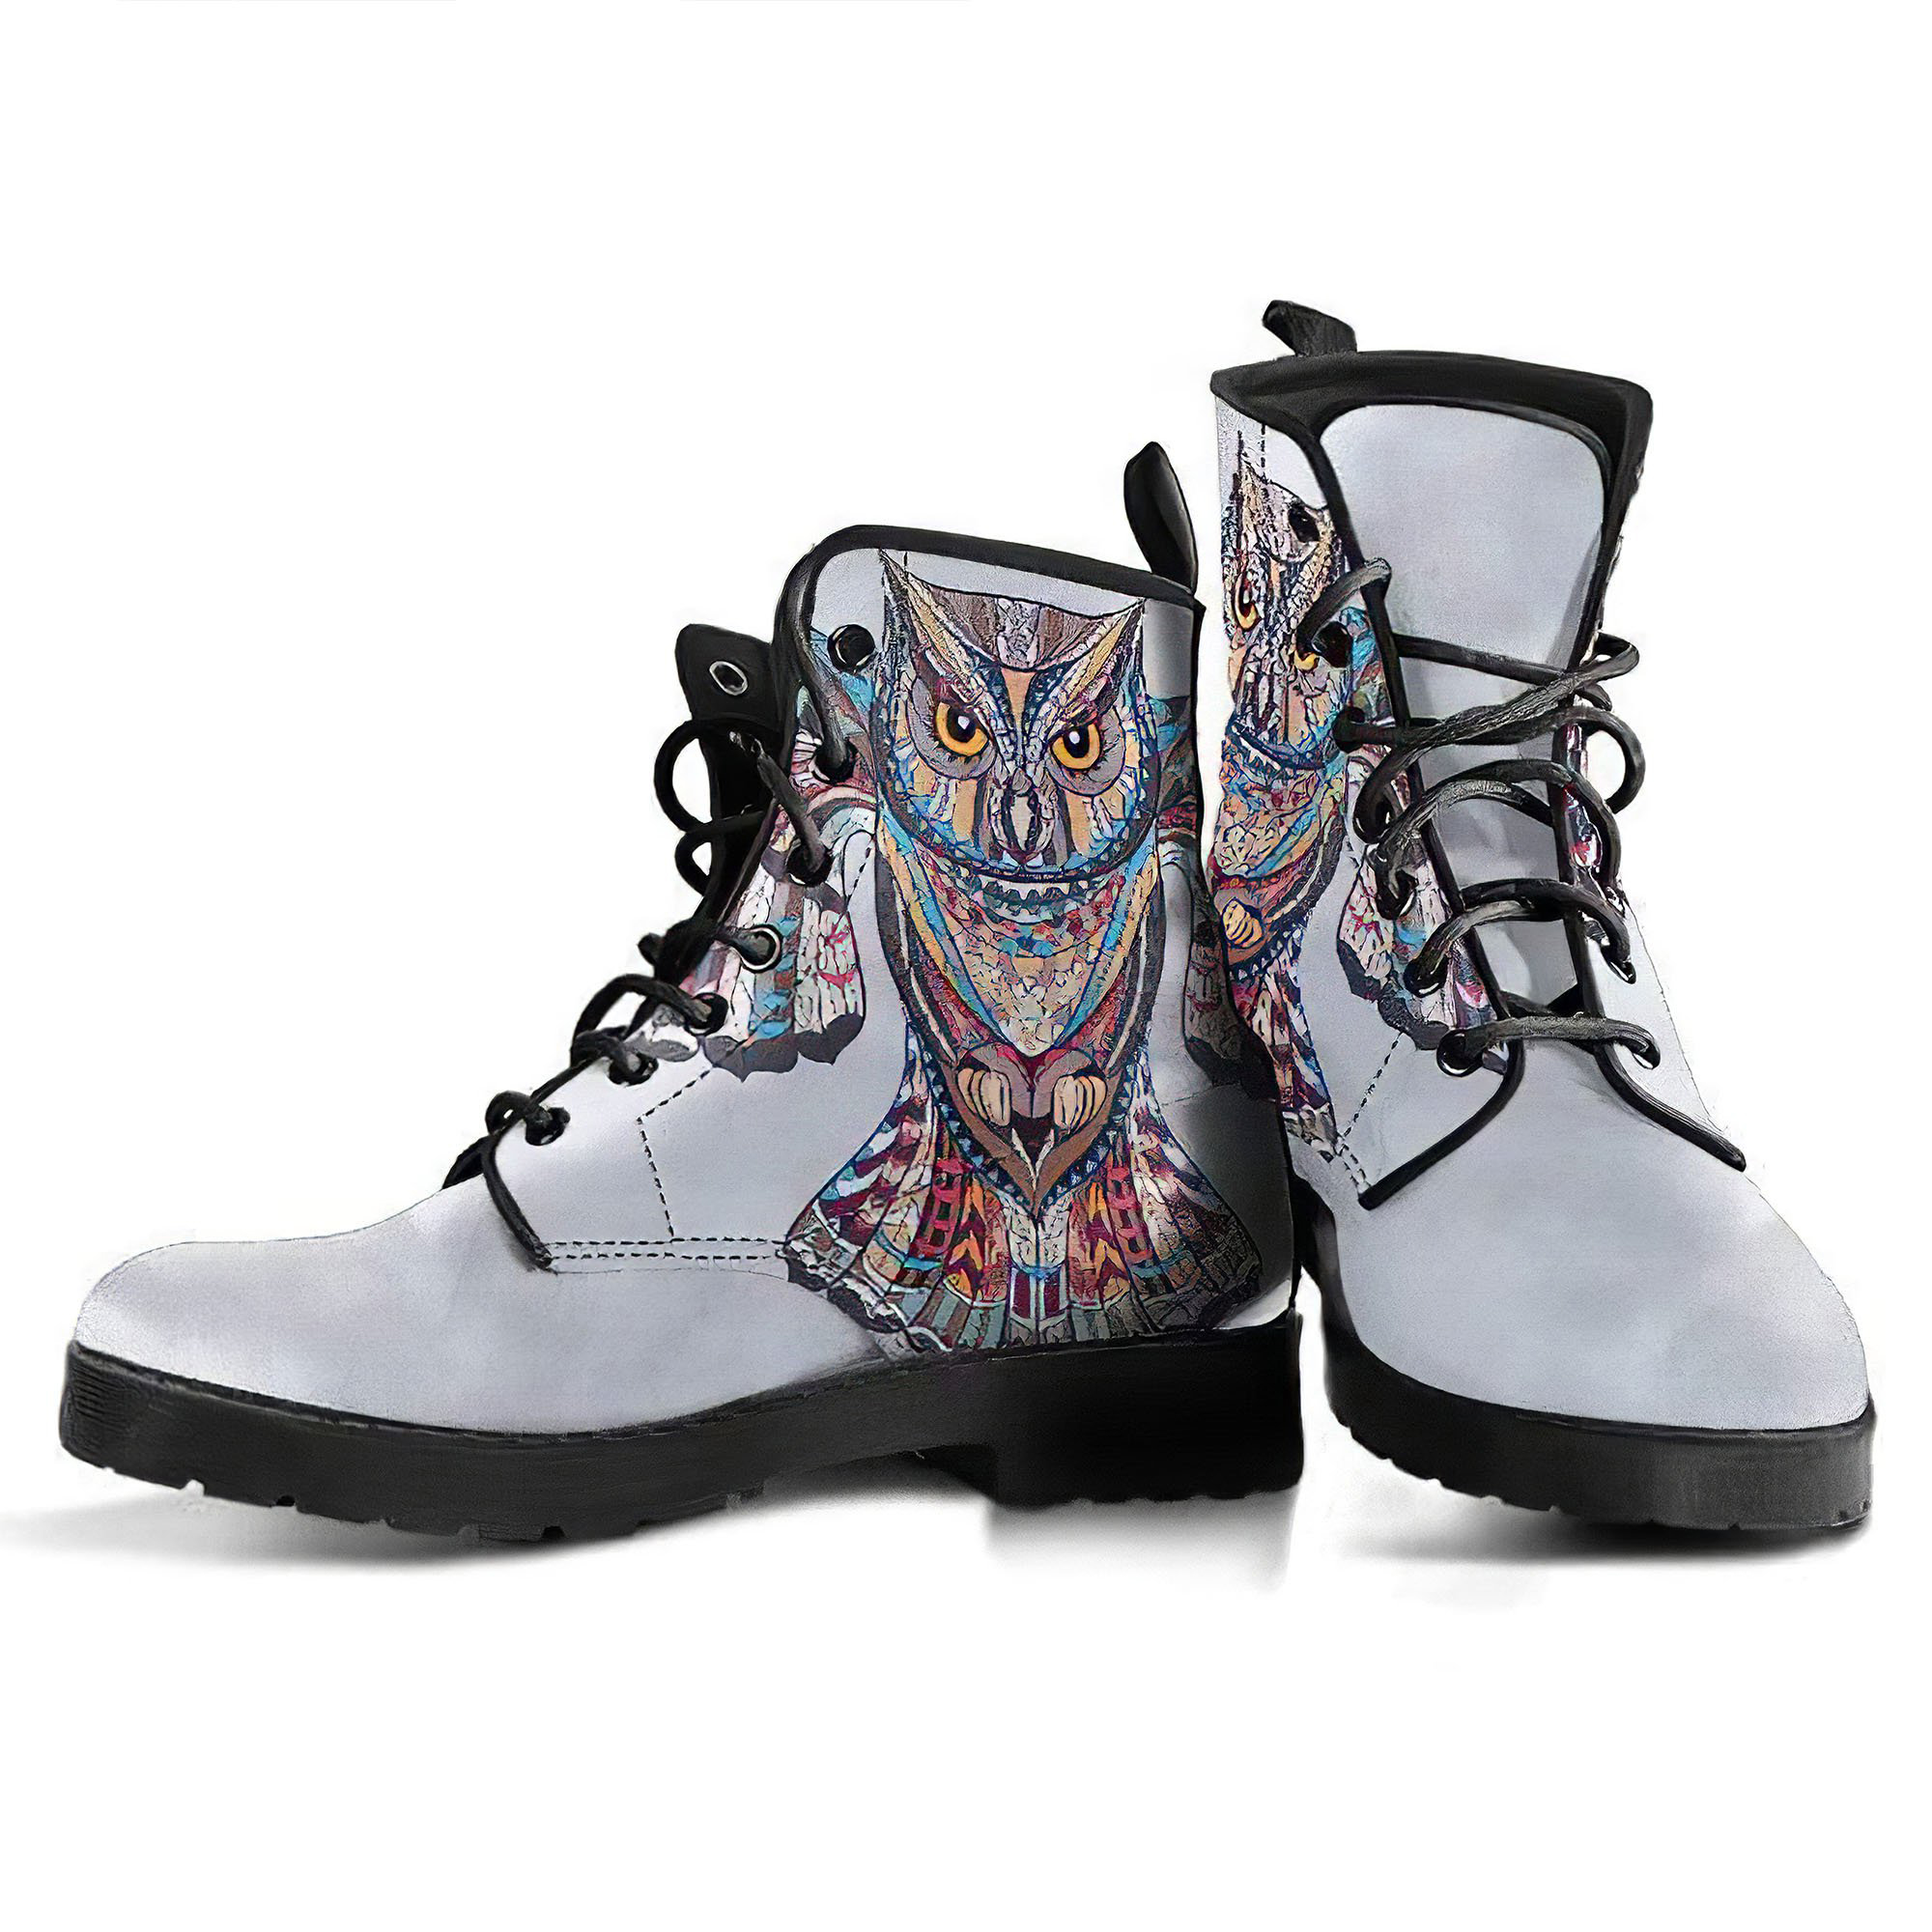 owl-handcrafted-boots-1-gp-main.jpg